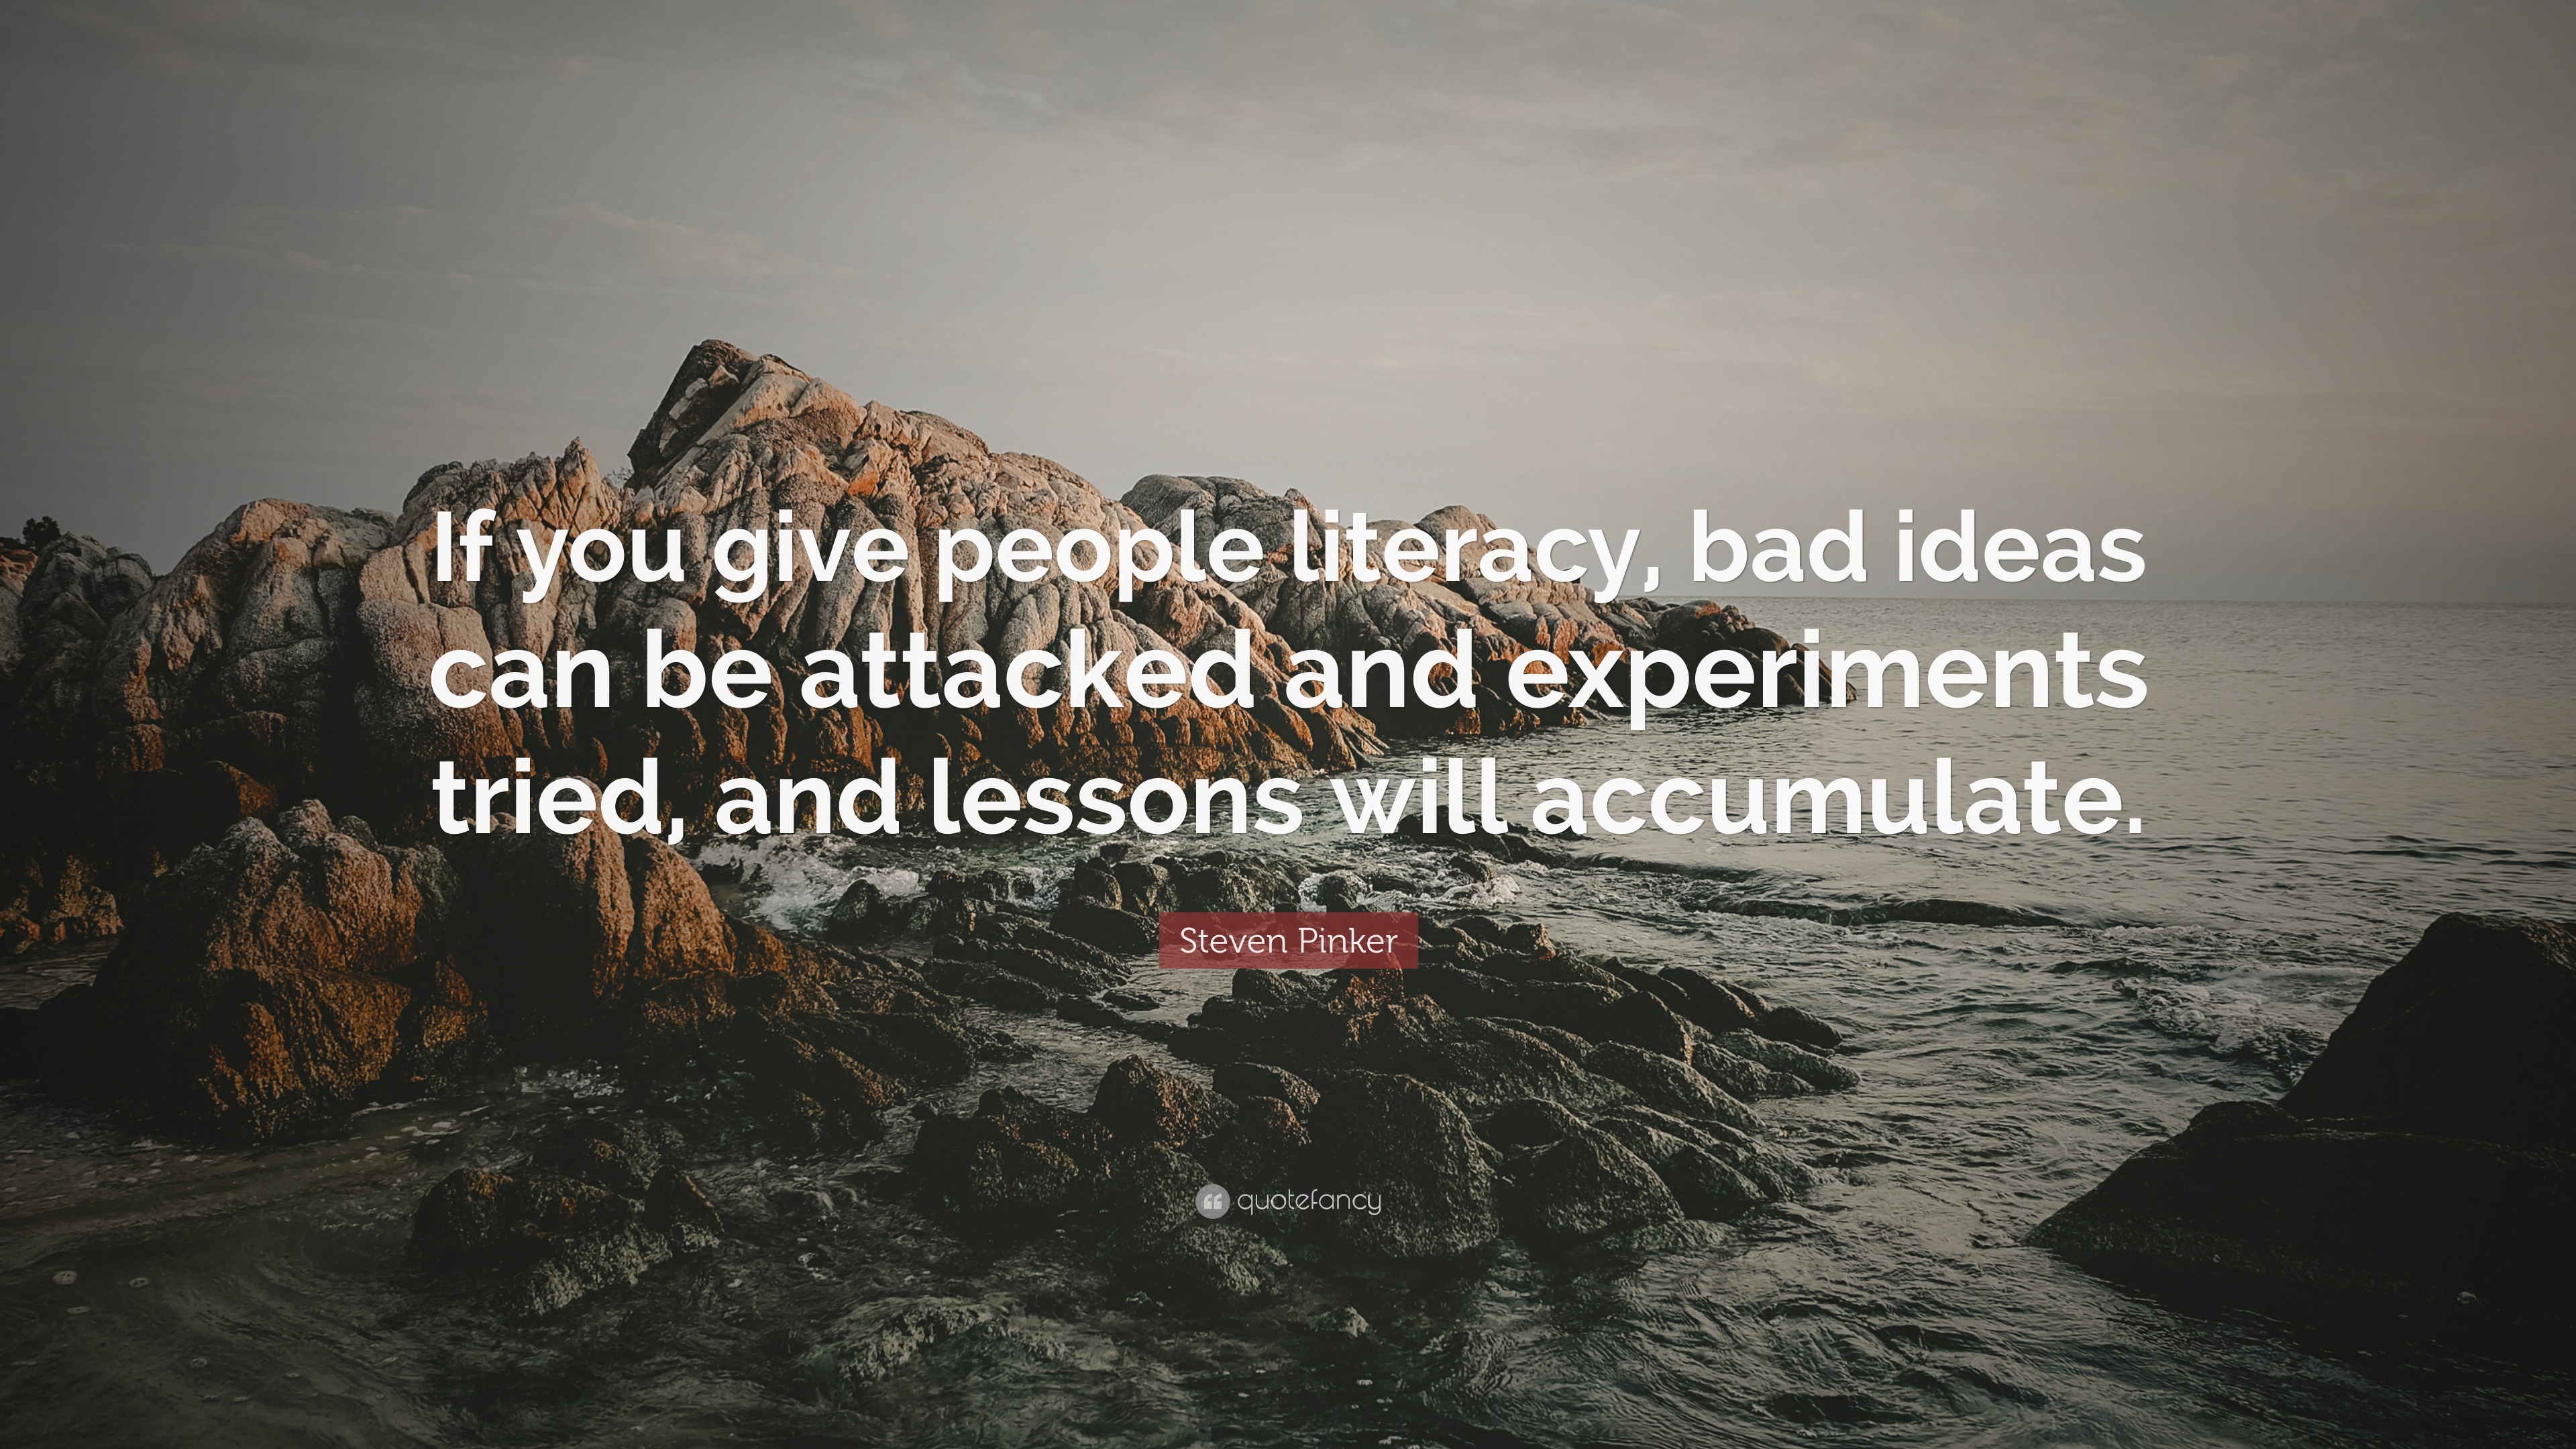 Steven Pinker Quote: "If you give people literacy, bad ...